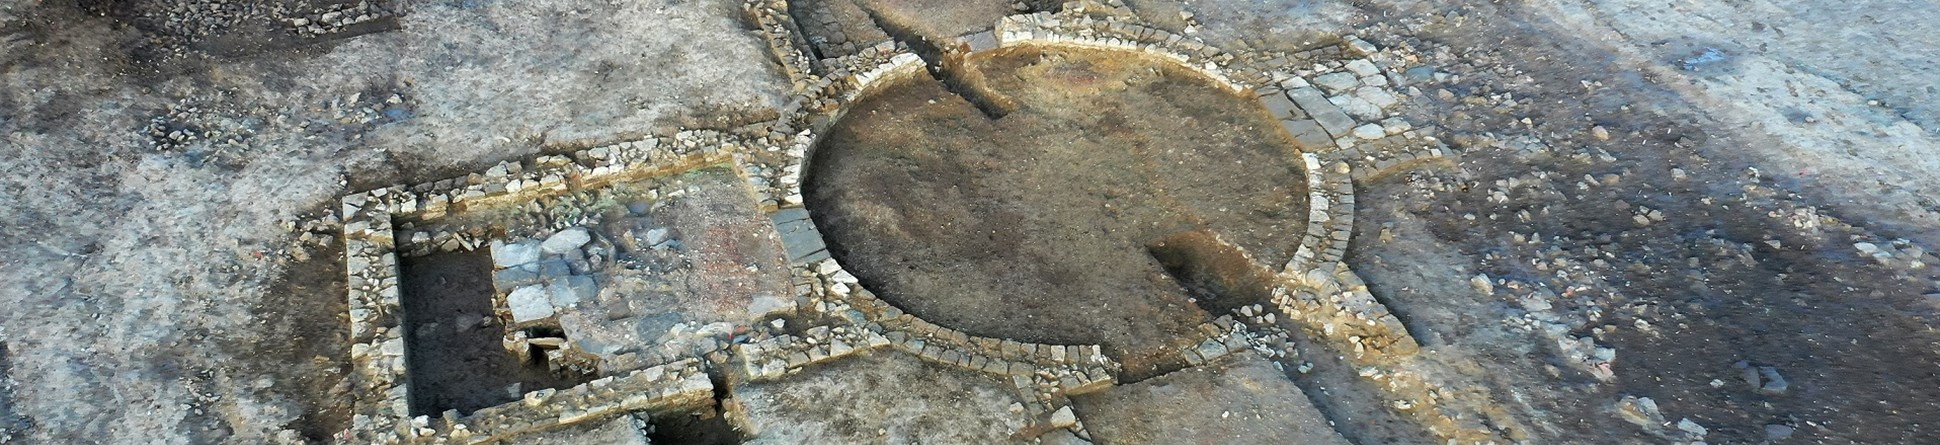 Low stone structures in excavated ground. The main structure includes a central circle of stone with three rectangular rooms radiating from it.